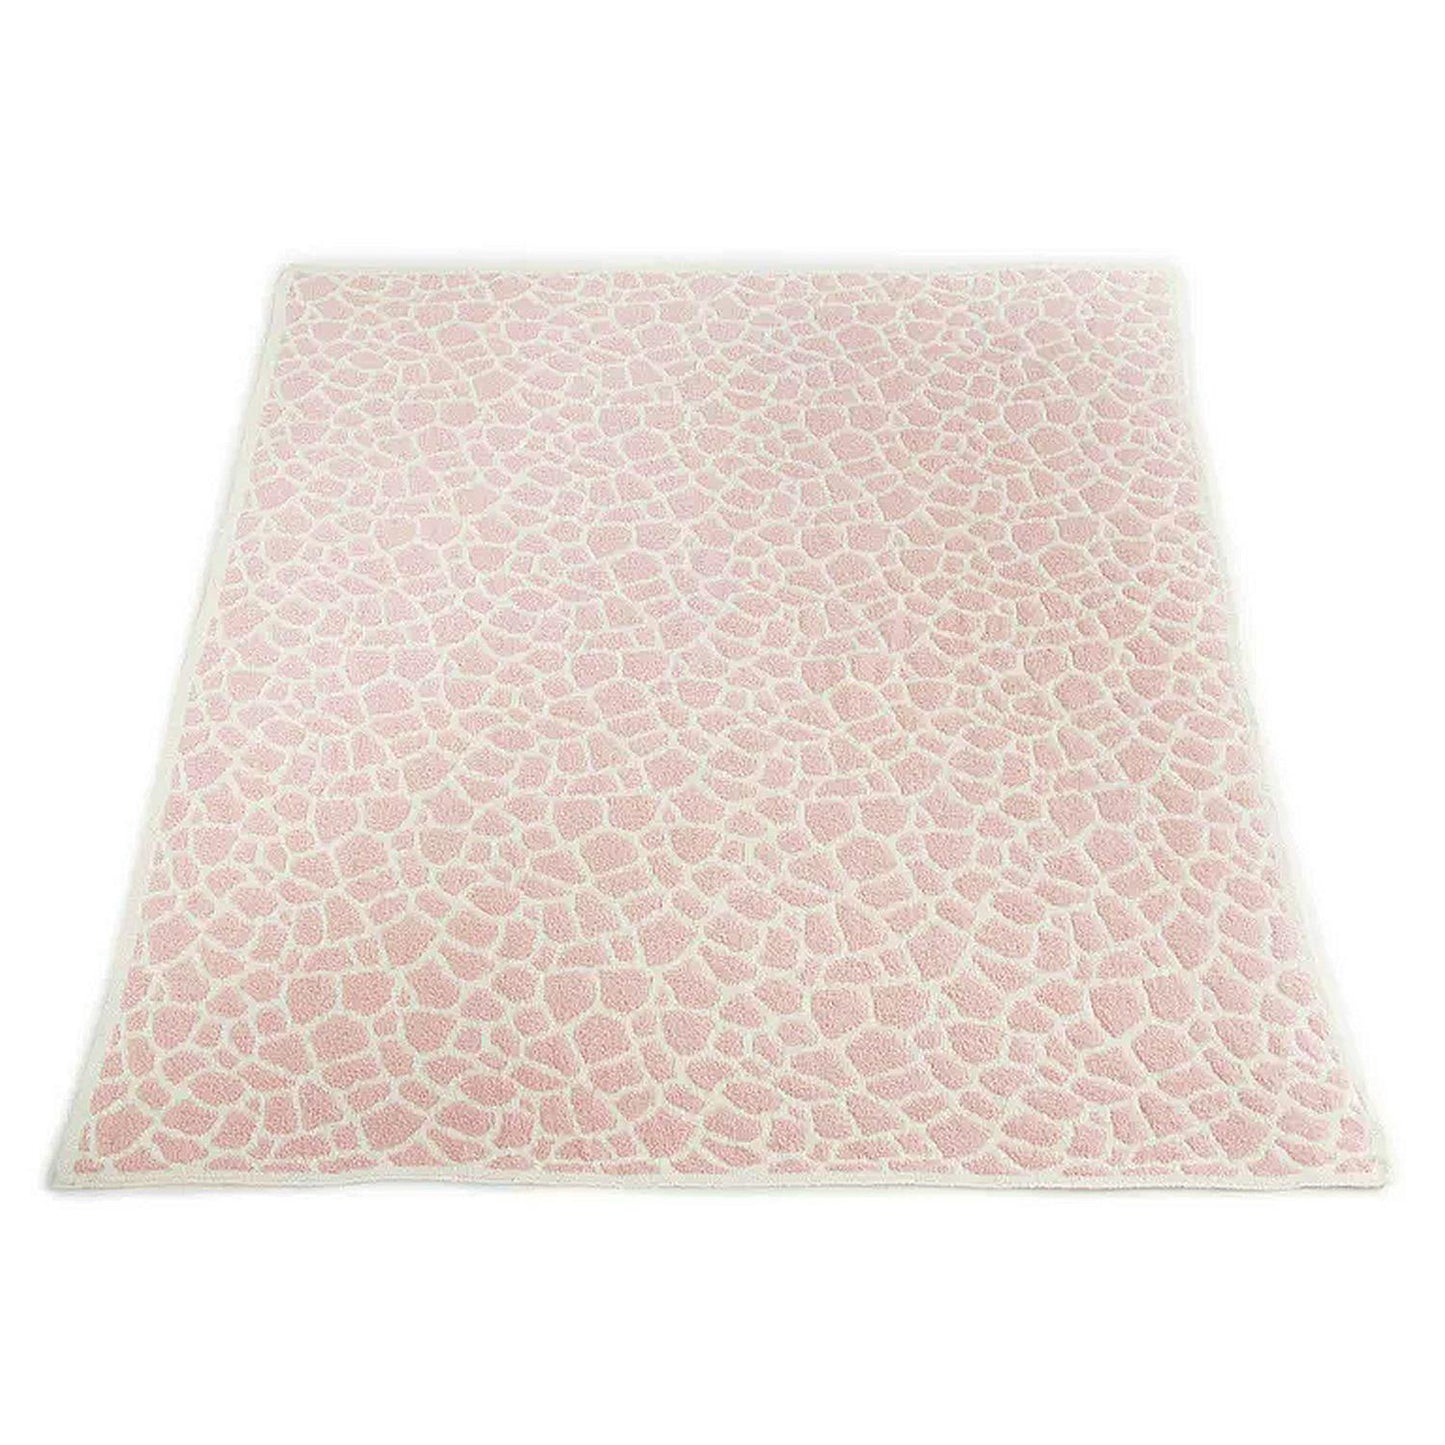 Crafted by Catherine 60x70 Cozy Knit Throw in Giraffe Pink